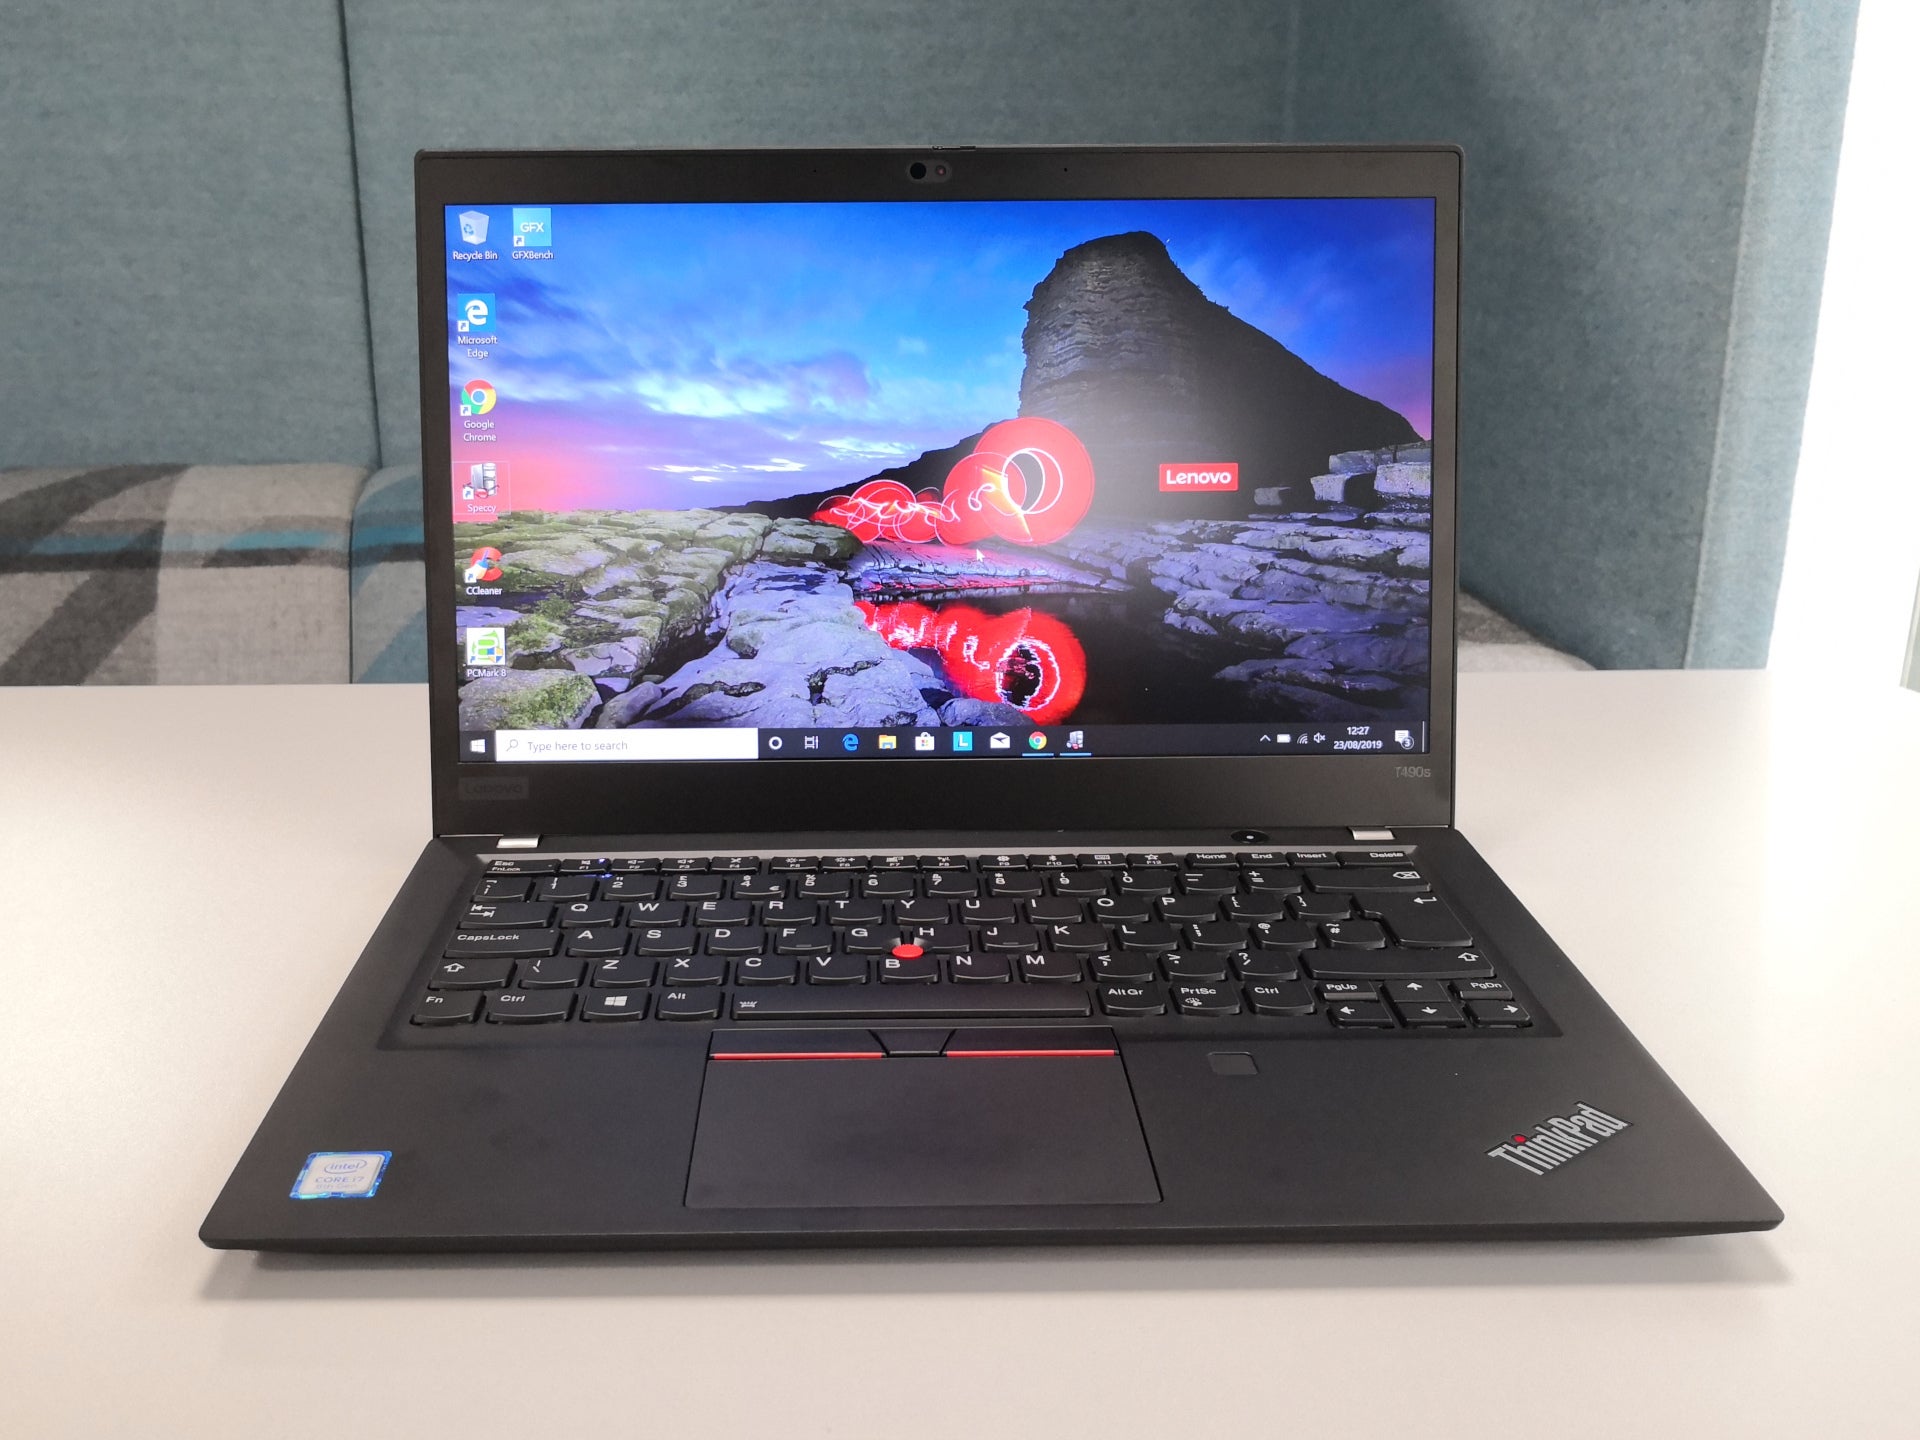 Lenovo ThinkPad T490s Review | Trusted Reviews